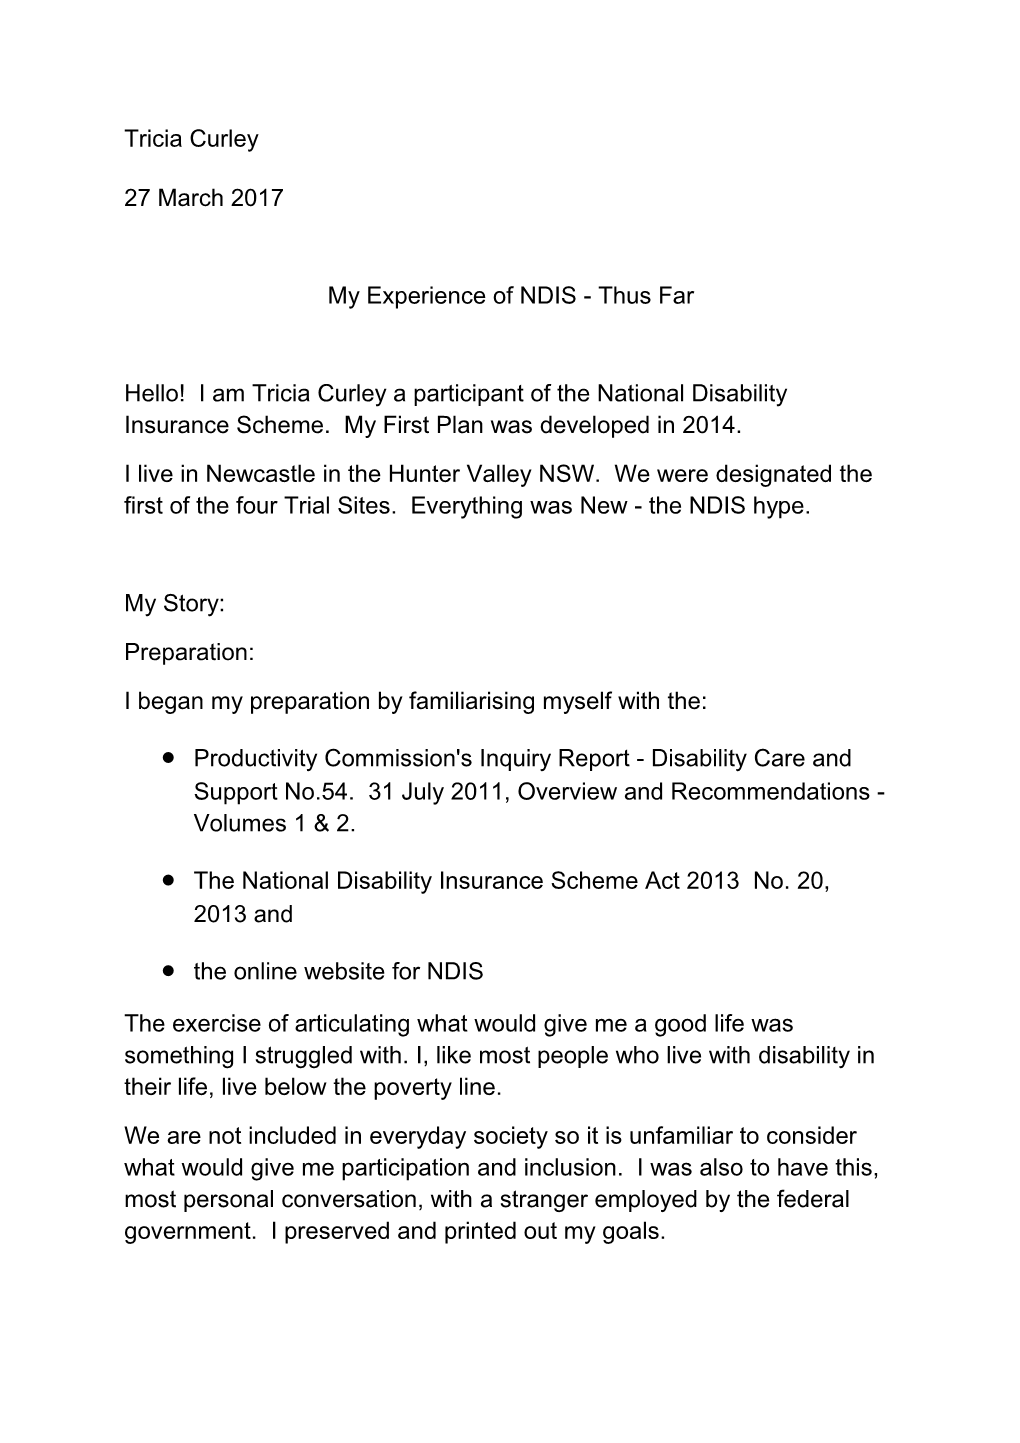 Submission 140 - Tricia Curley - National Disability Insurance Scheme (NDIS) Costs